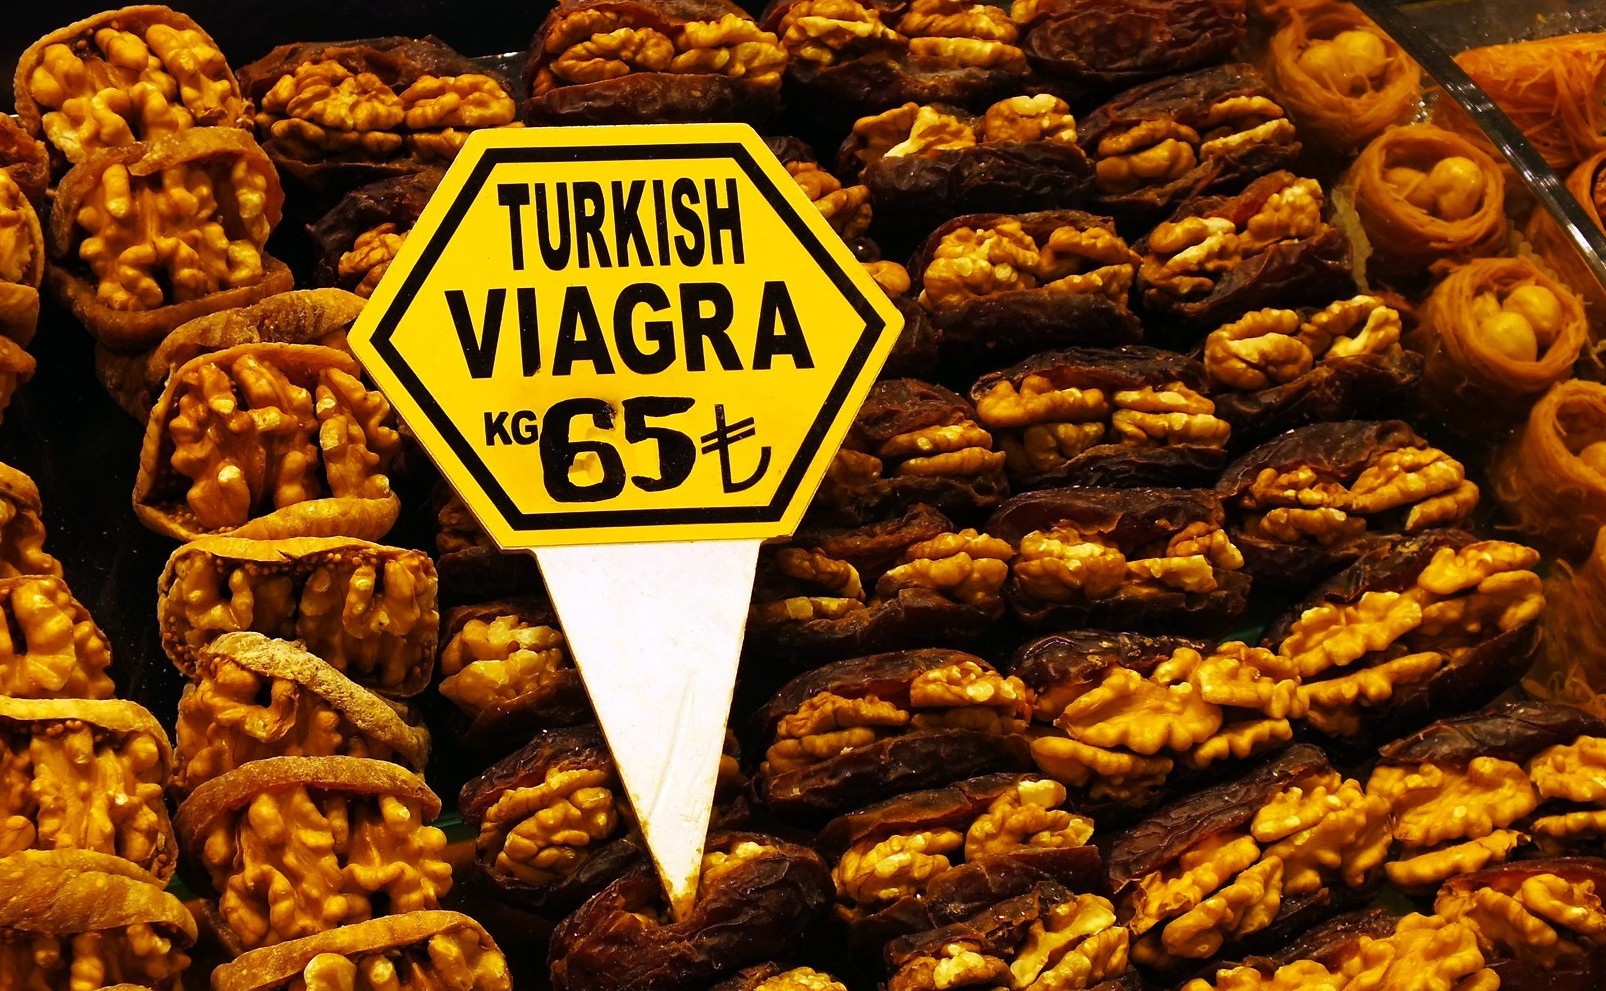 Have you tried “Turkish Viagra” yet?